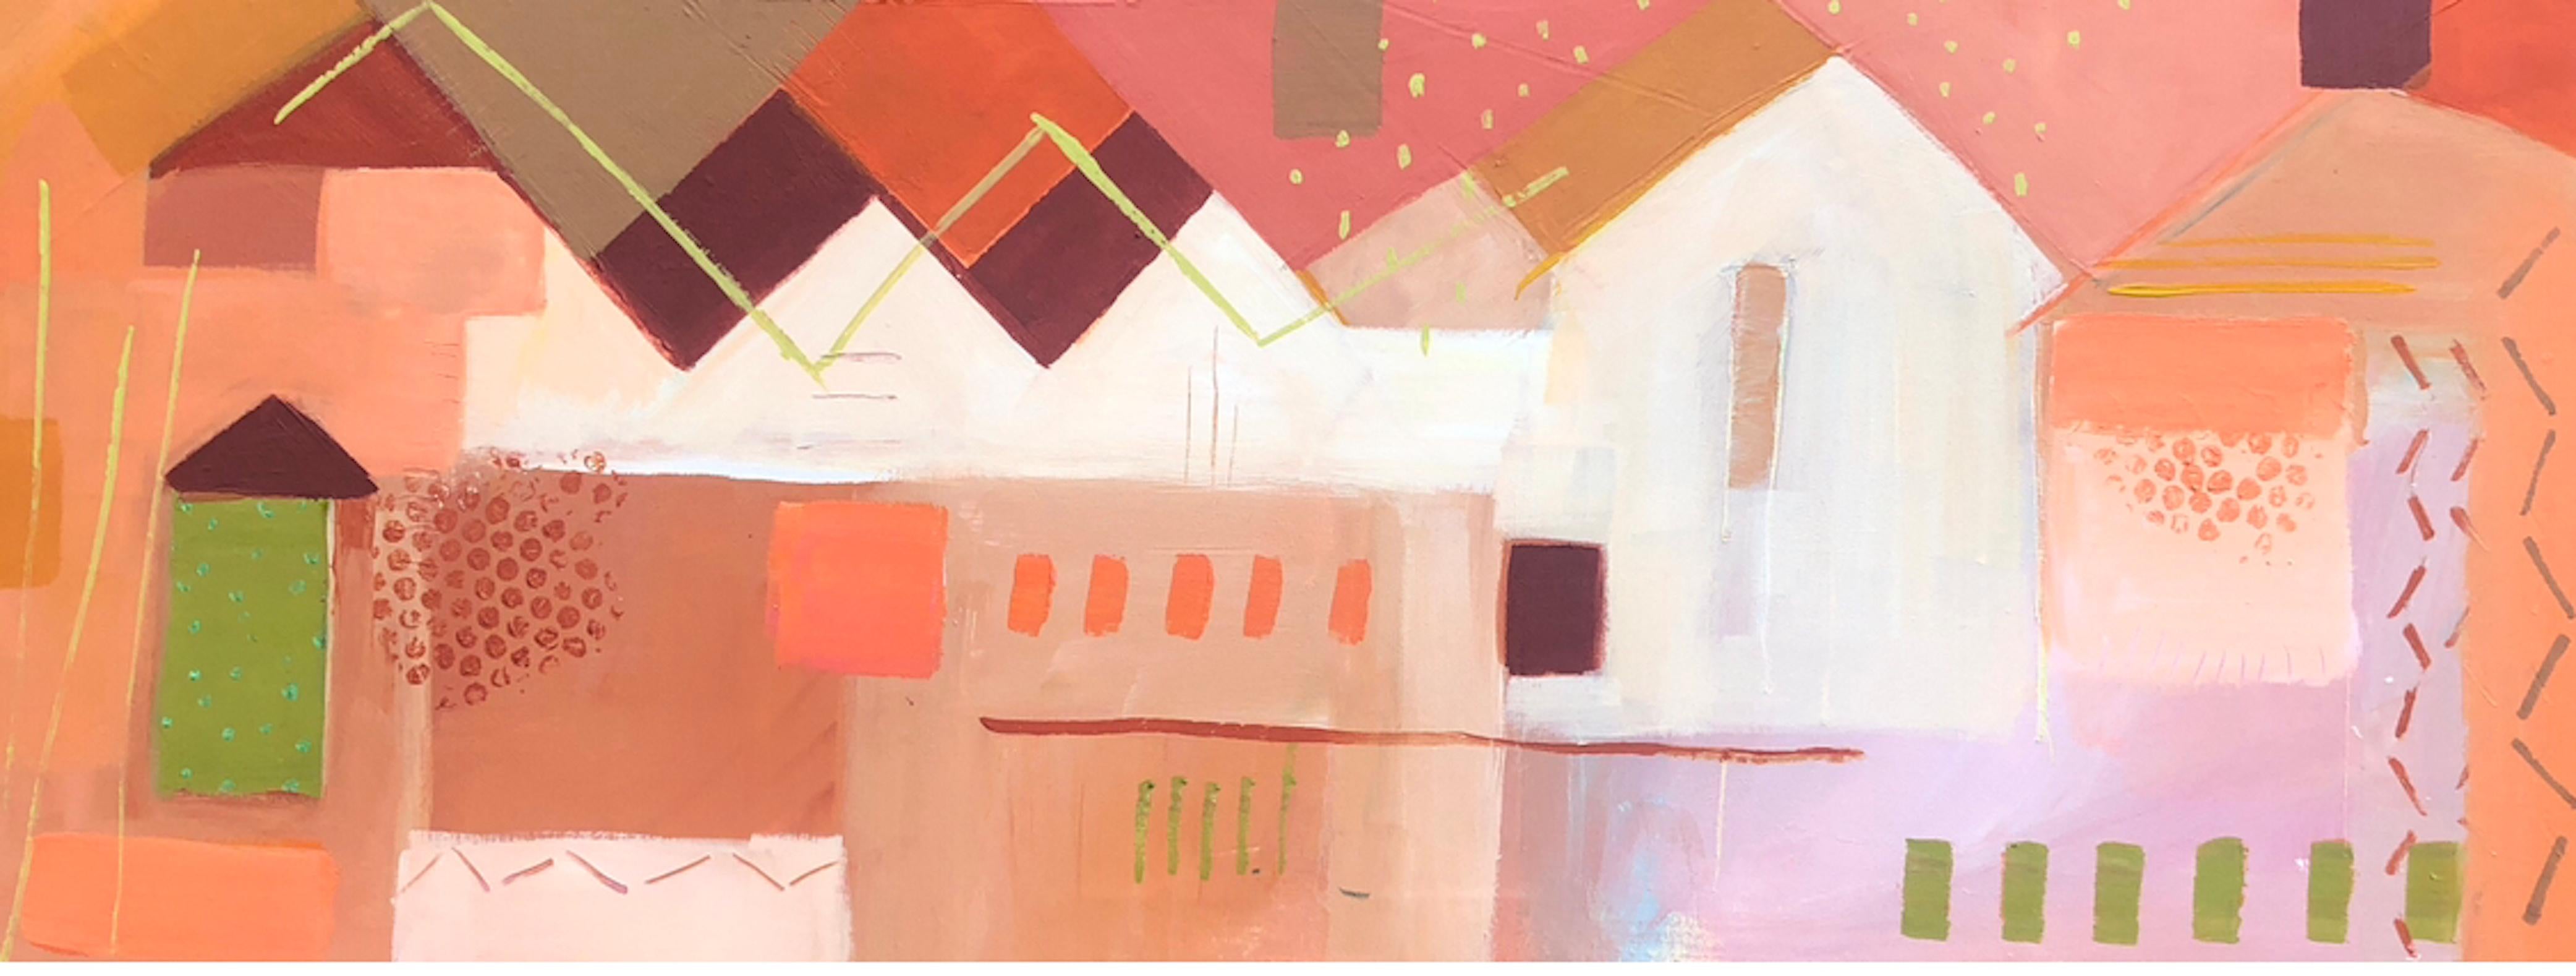 Maggie LaPorte Banks Abstract Painting - Bryggen Facades 6 by Maggie LaPorte-Banks, Original painting, Abstract Art, Pink